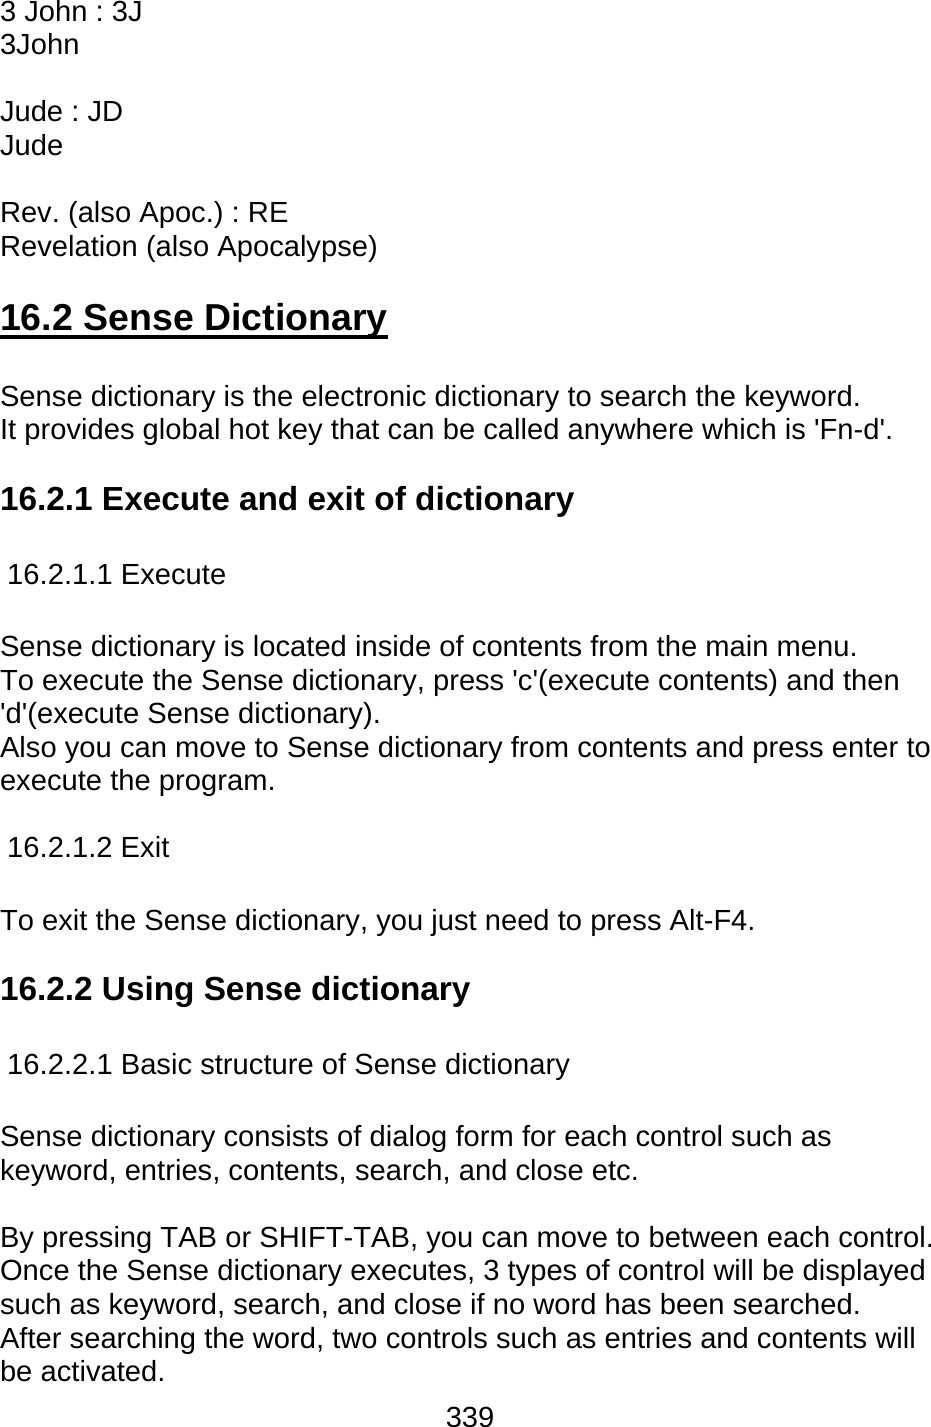 339  3 John : 3J 3John  Jude : JD Jude  Rev. (also Apoc.) : RE Revelation (also Apocalypse)  16.2 Sense Dictionary  Sense dictionary is the electronic dictionary to search the keyword. It provides global hot key that can be called anywhere which is &apos;Fn-d&apos;.     16.2.1 Execute and exit of dictionary    16.2.1.1 Execute  Sense dictionary is located inside of contents from the main menu.   To execute the Sense dictionary, press &apos;c&apos;(execute contents) and then &apos;d&apos;(execute Sense dictionary). Also you can move to Sense dictionary from contents and press enter to execute the program.  16.2.1.2 Exit  To exit the Sense dictionary, you just need to press Alt-F4.   16.2.2 Using Sense dictionary  16.2.2.1 Basic structure of Sense dictionary  Sense dictionary consists of dialog form for each control such as keyword, entries, contents, search, and close etc.    By pressing TAB or SHIFT-TAB, you can move to between each control. Once the Sense dictionary executes, 3 types of control will be displayed such as keyword, search, and close if no word has been searched. After searching the word, two controls such as entries and contents will be activated.   